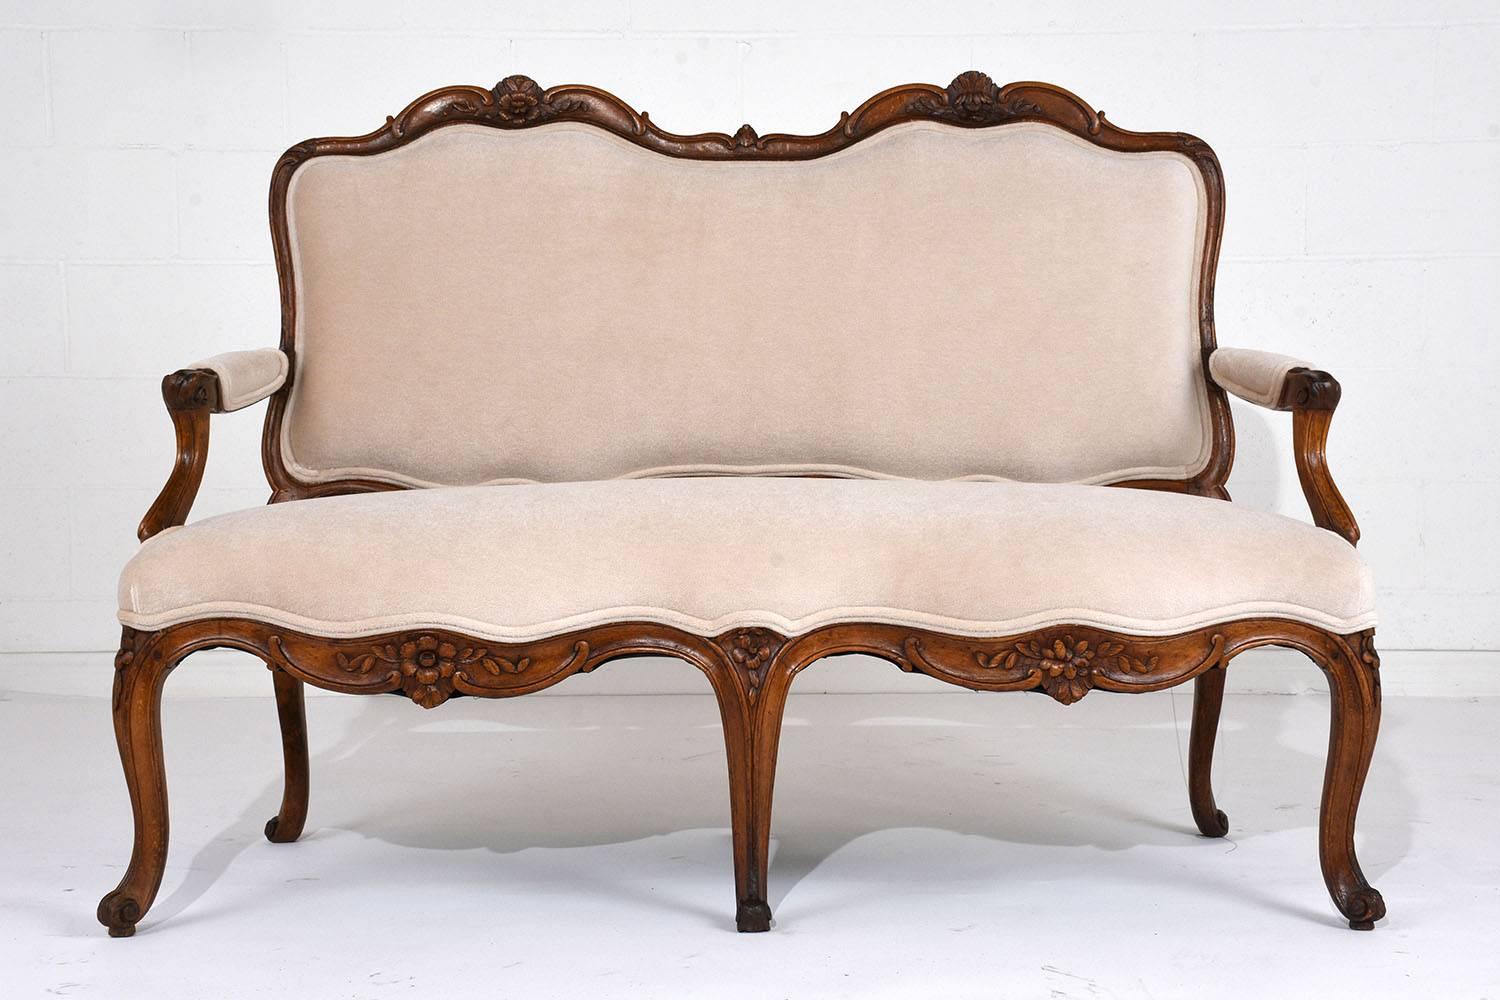 This Antique 18th Century Louis XV-Style Sofa has a hand-carved frame made of walnut wood finished in its original rich walnut color stain finish and has been professionally restored. The settee is ornately adorned with six different handcrafted